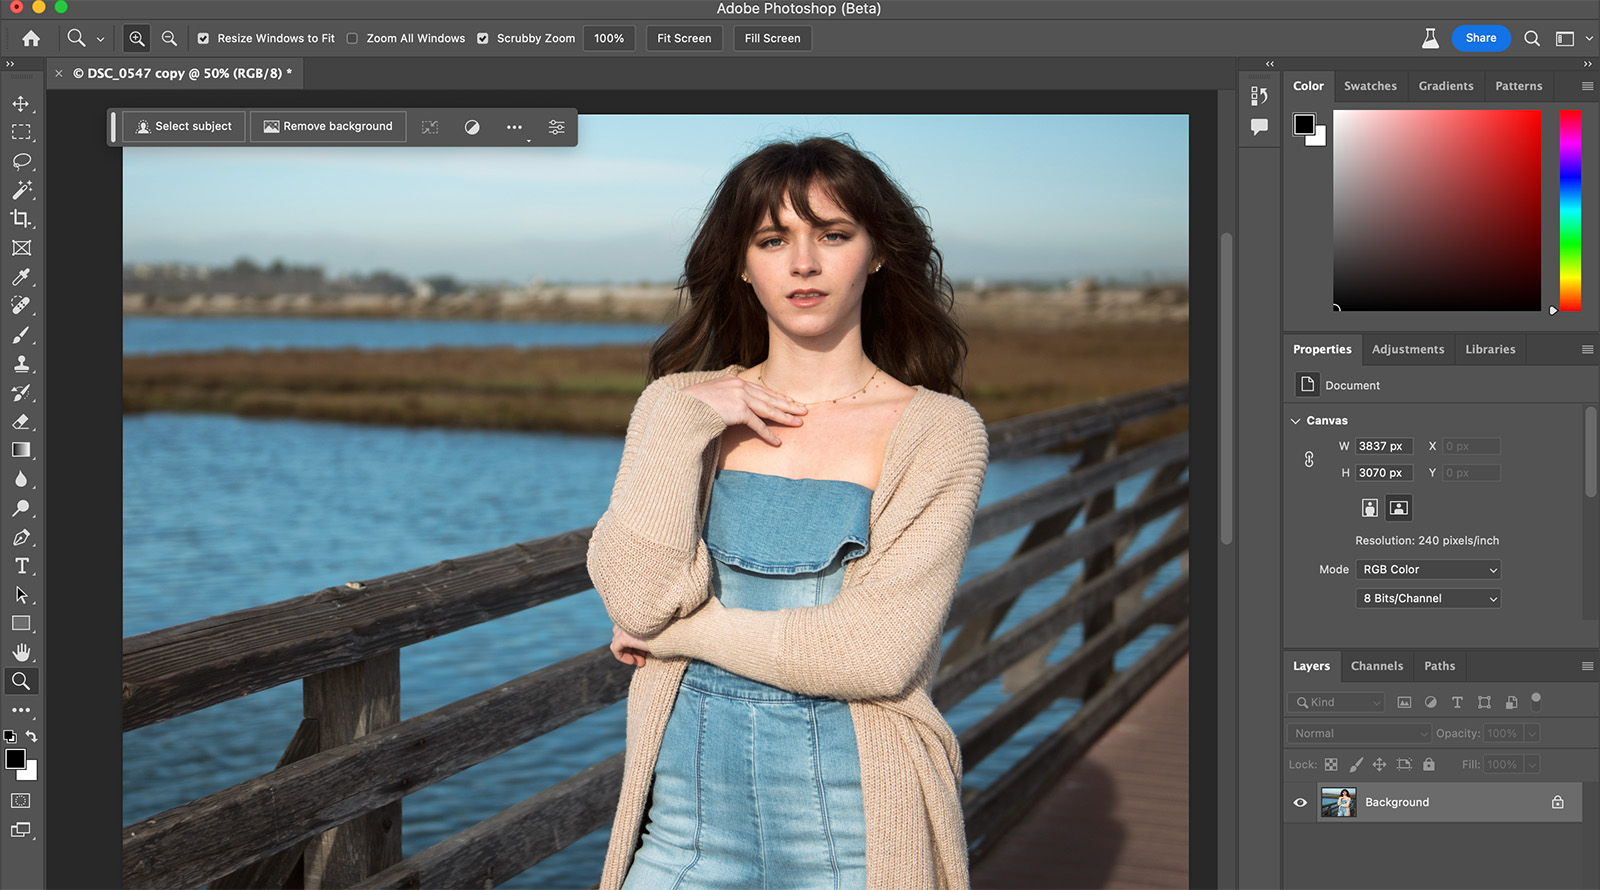 how to download the ai photoshop